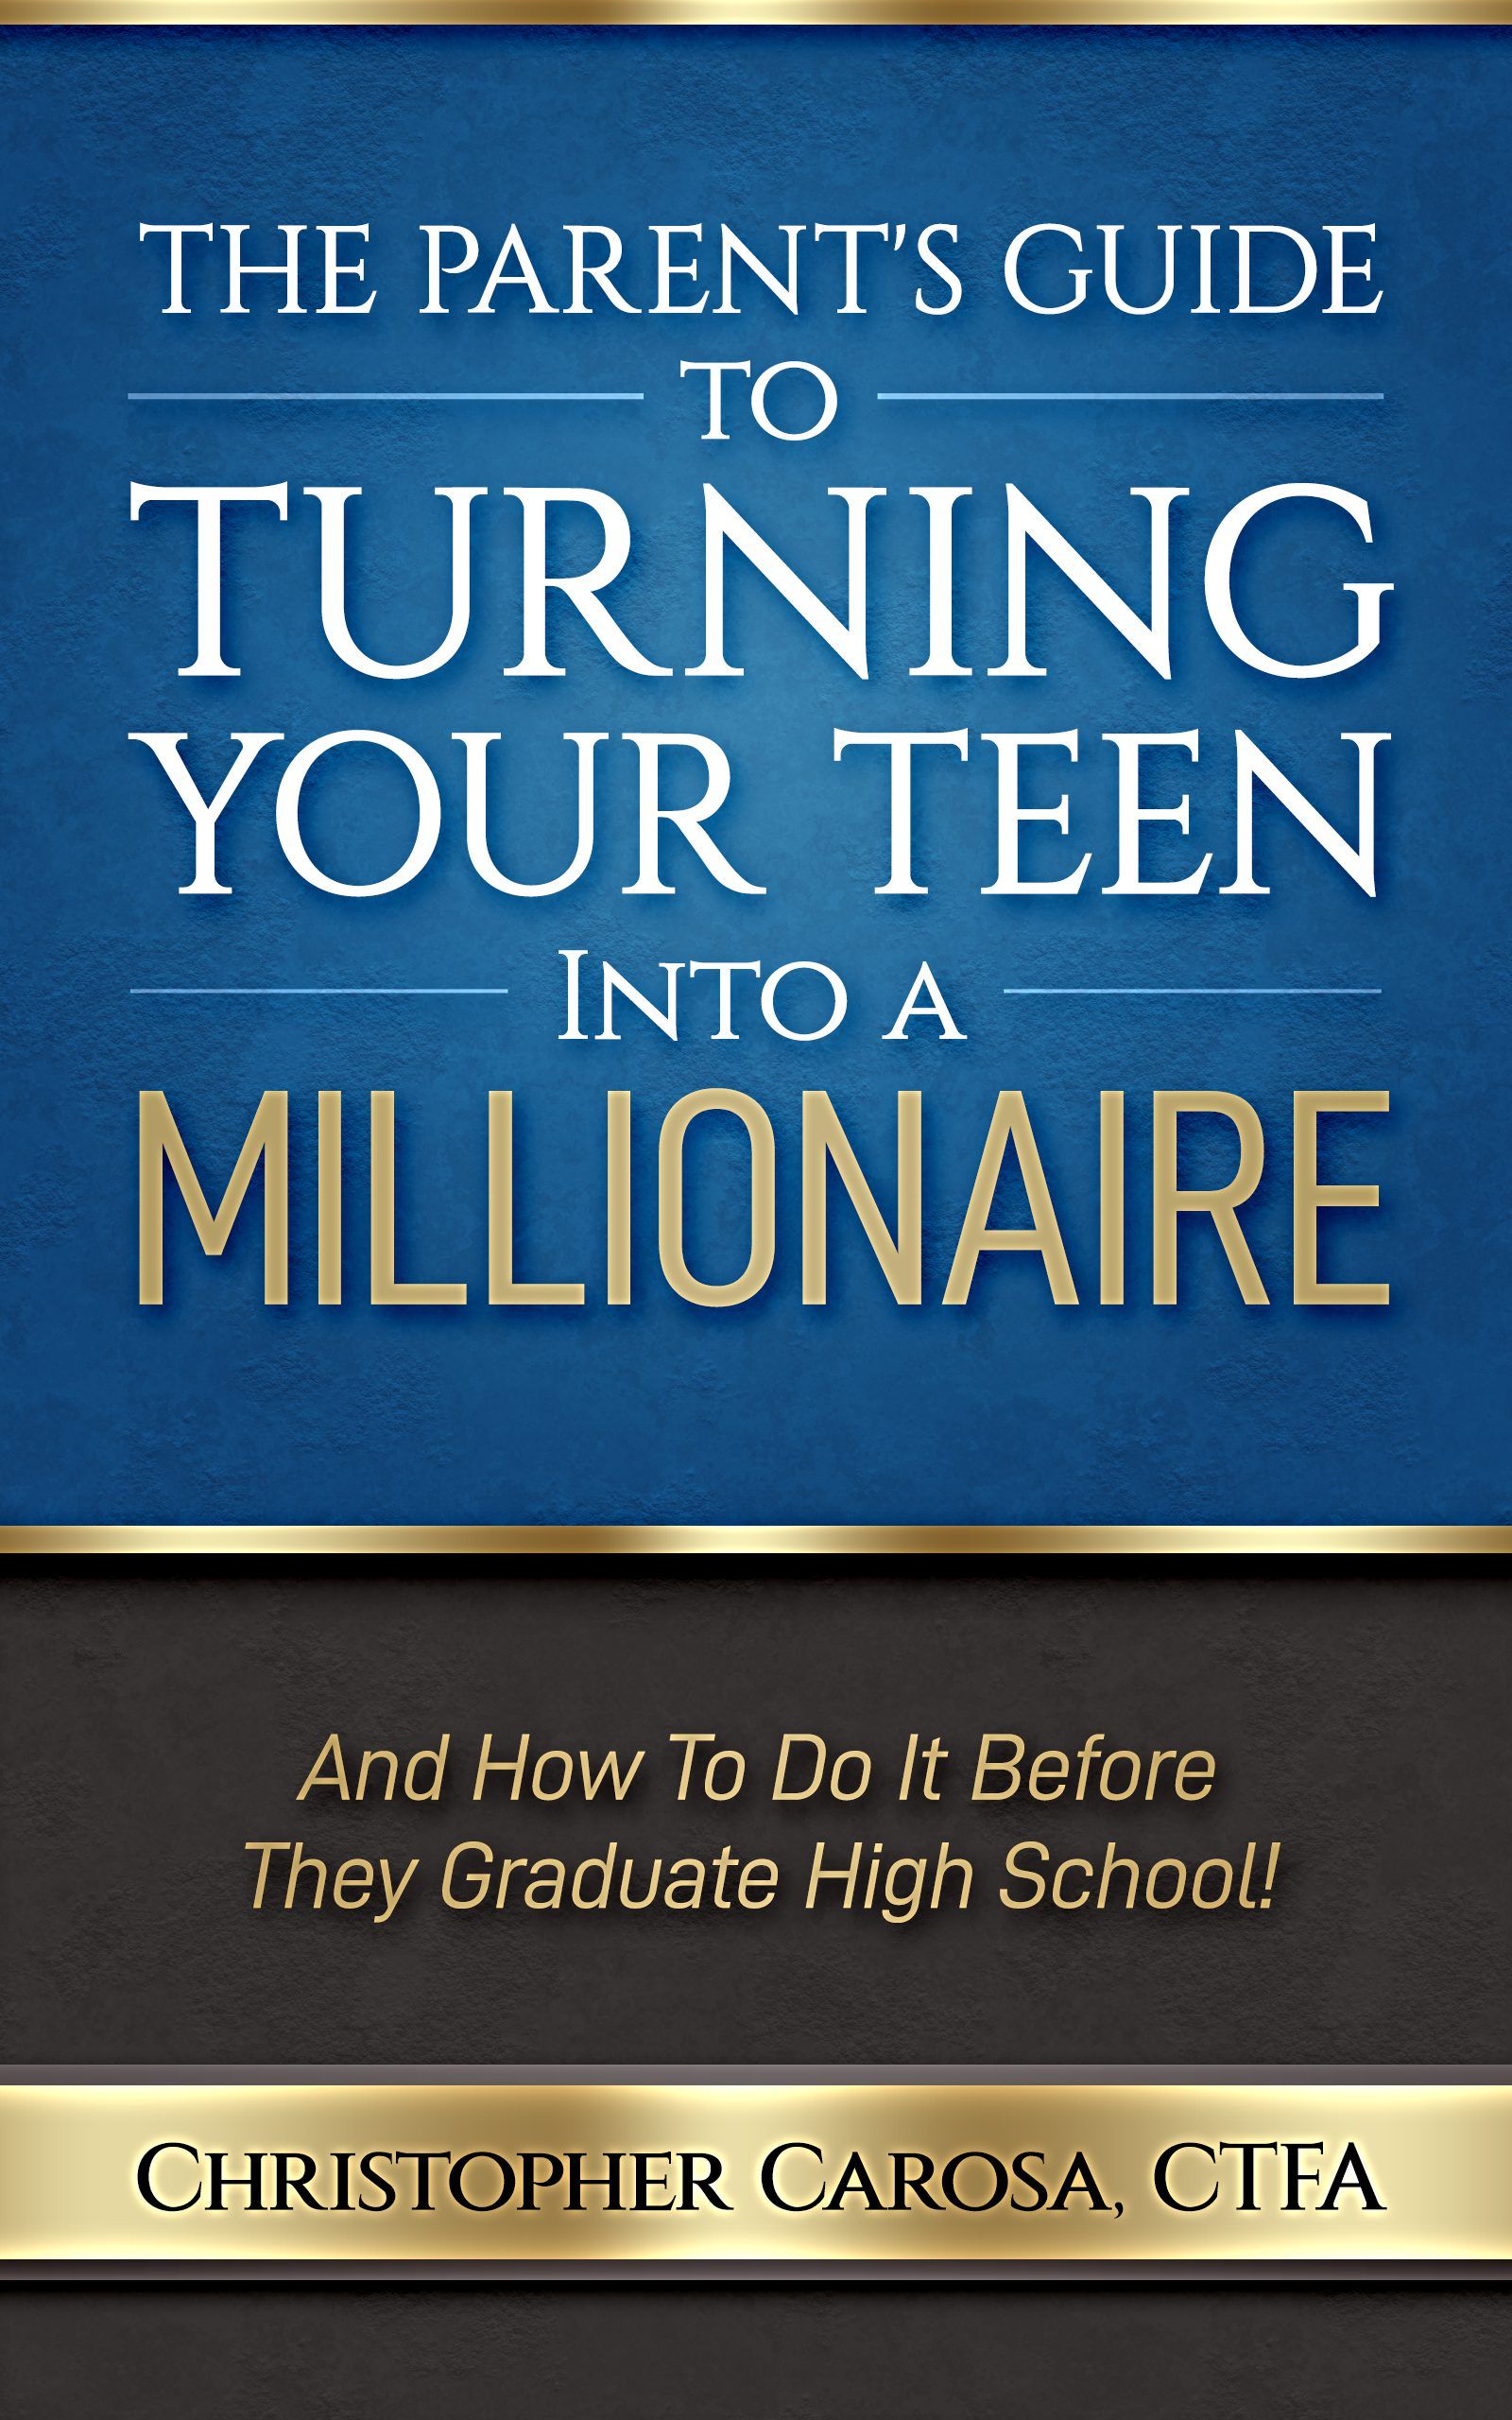 Parents Guide to Teenage Millionaires FINAL Cover